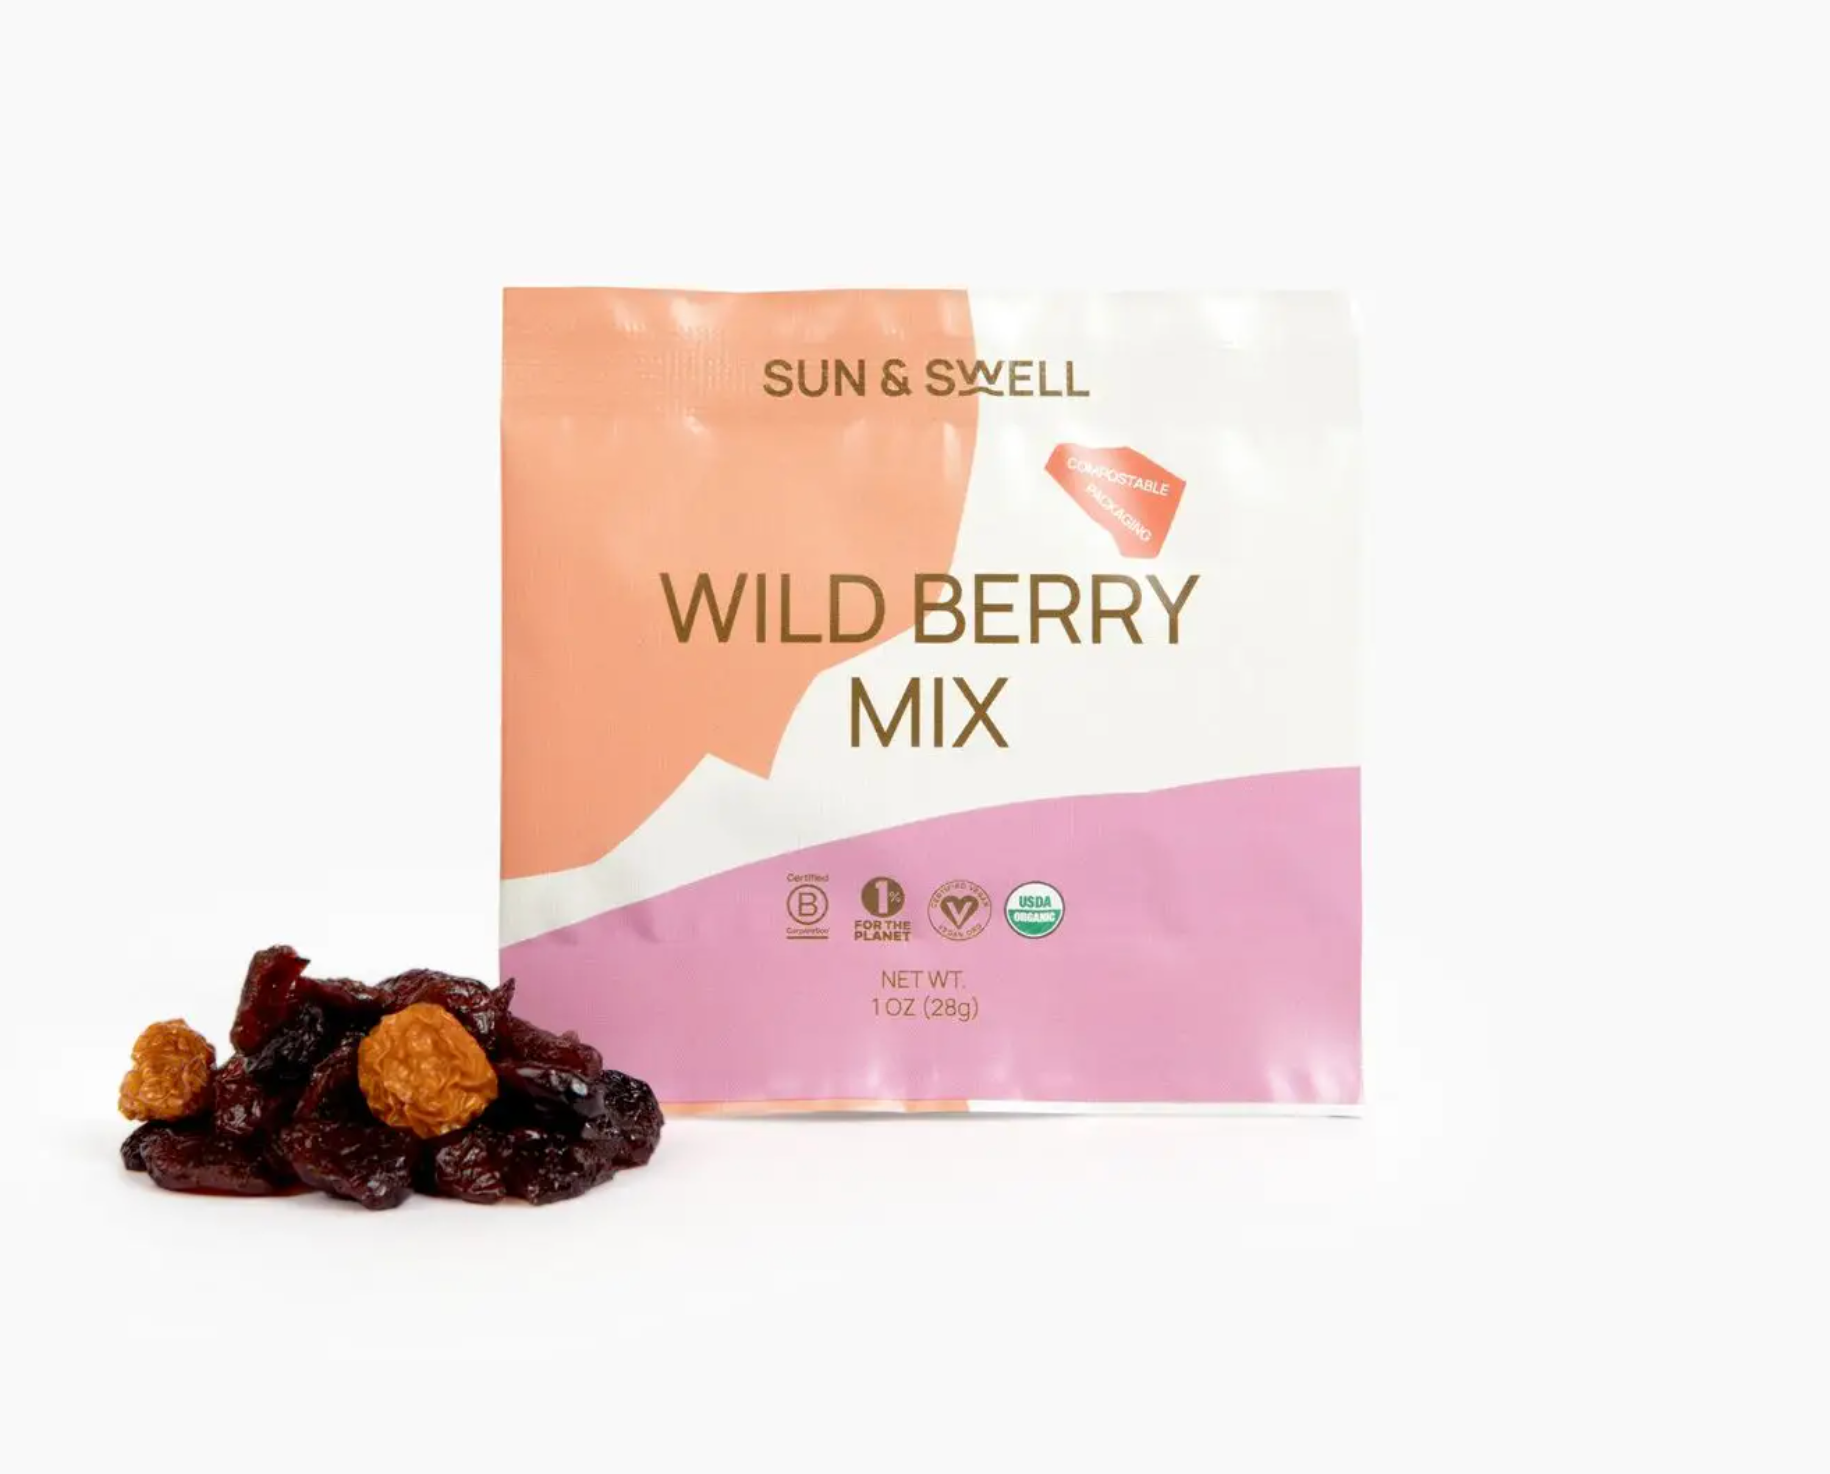 Small pouch of wild berry dried berries with a small pile of dried berries beside it